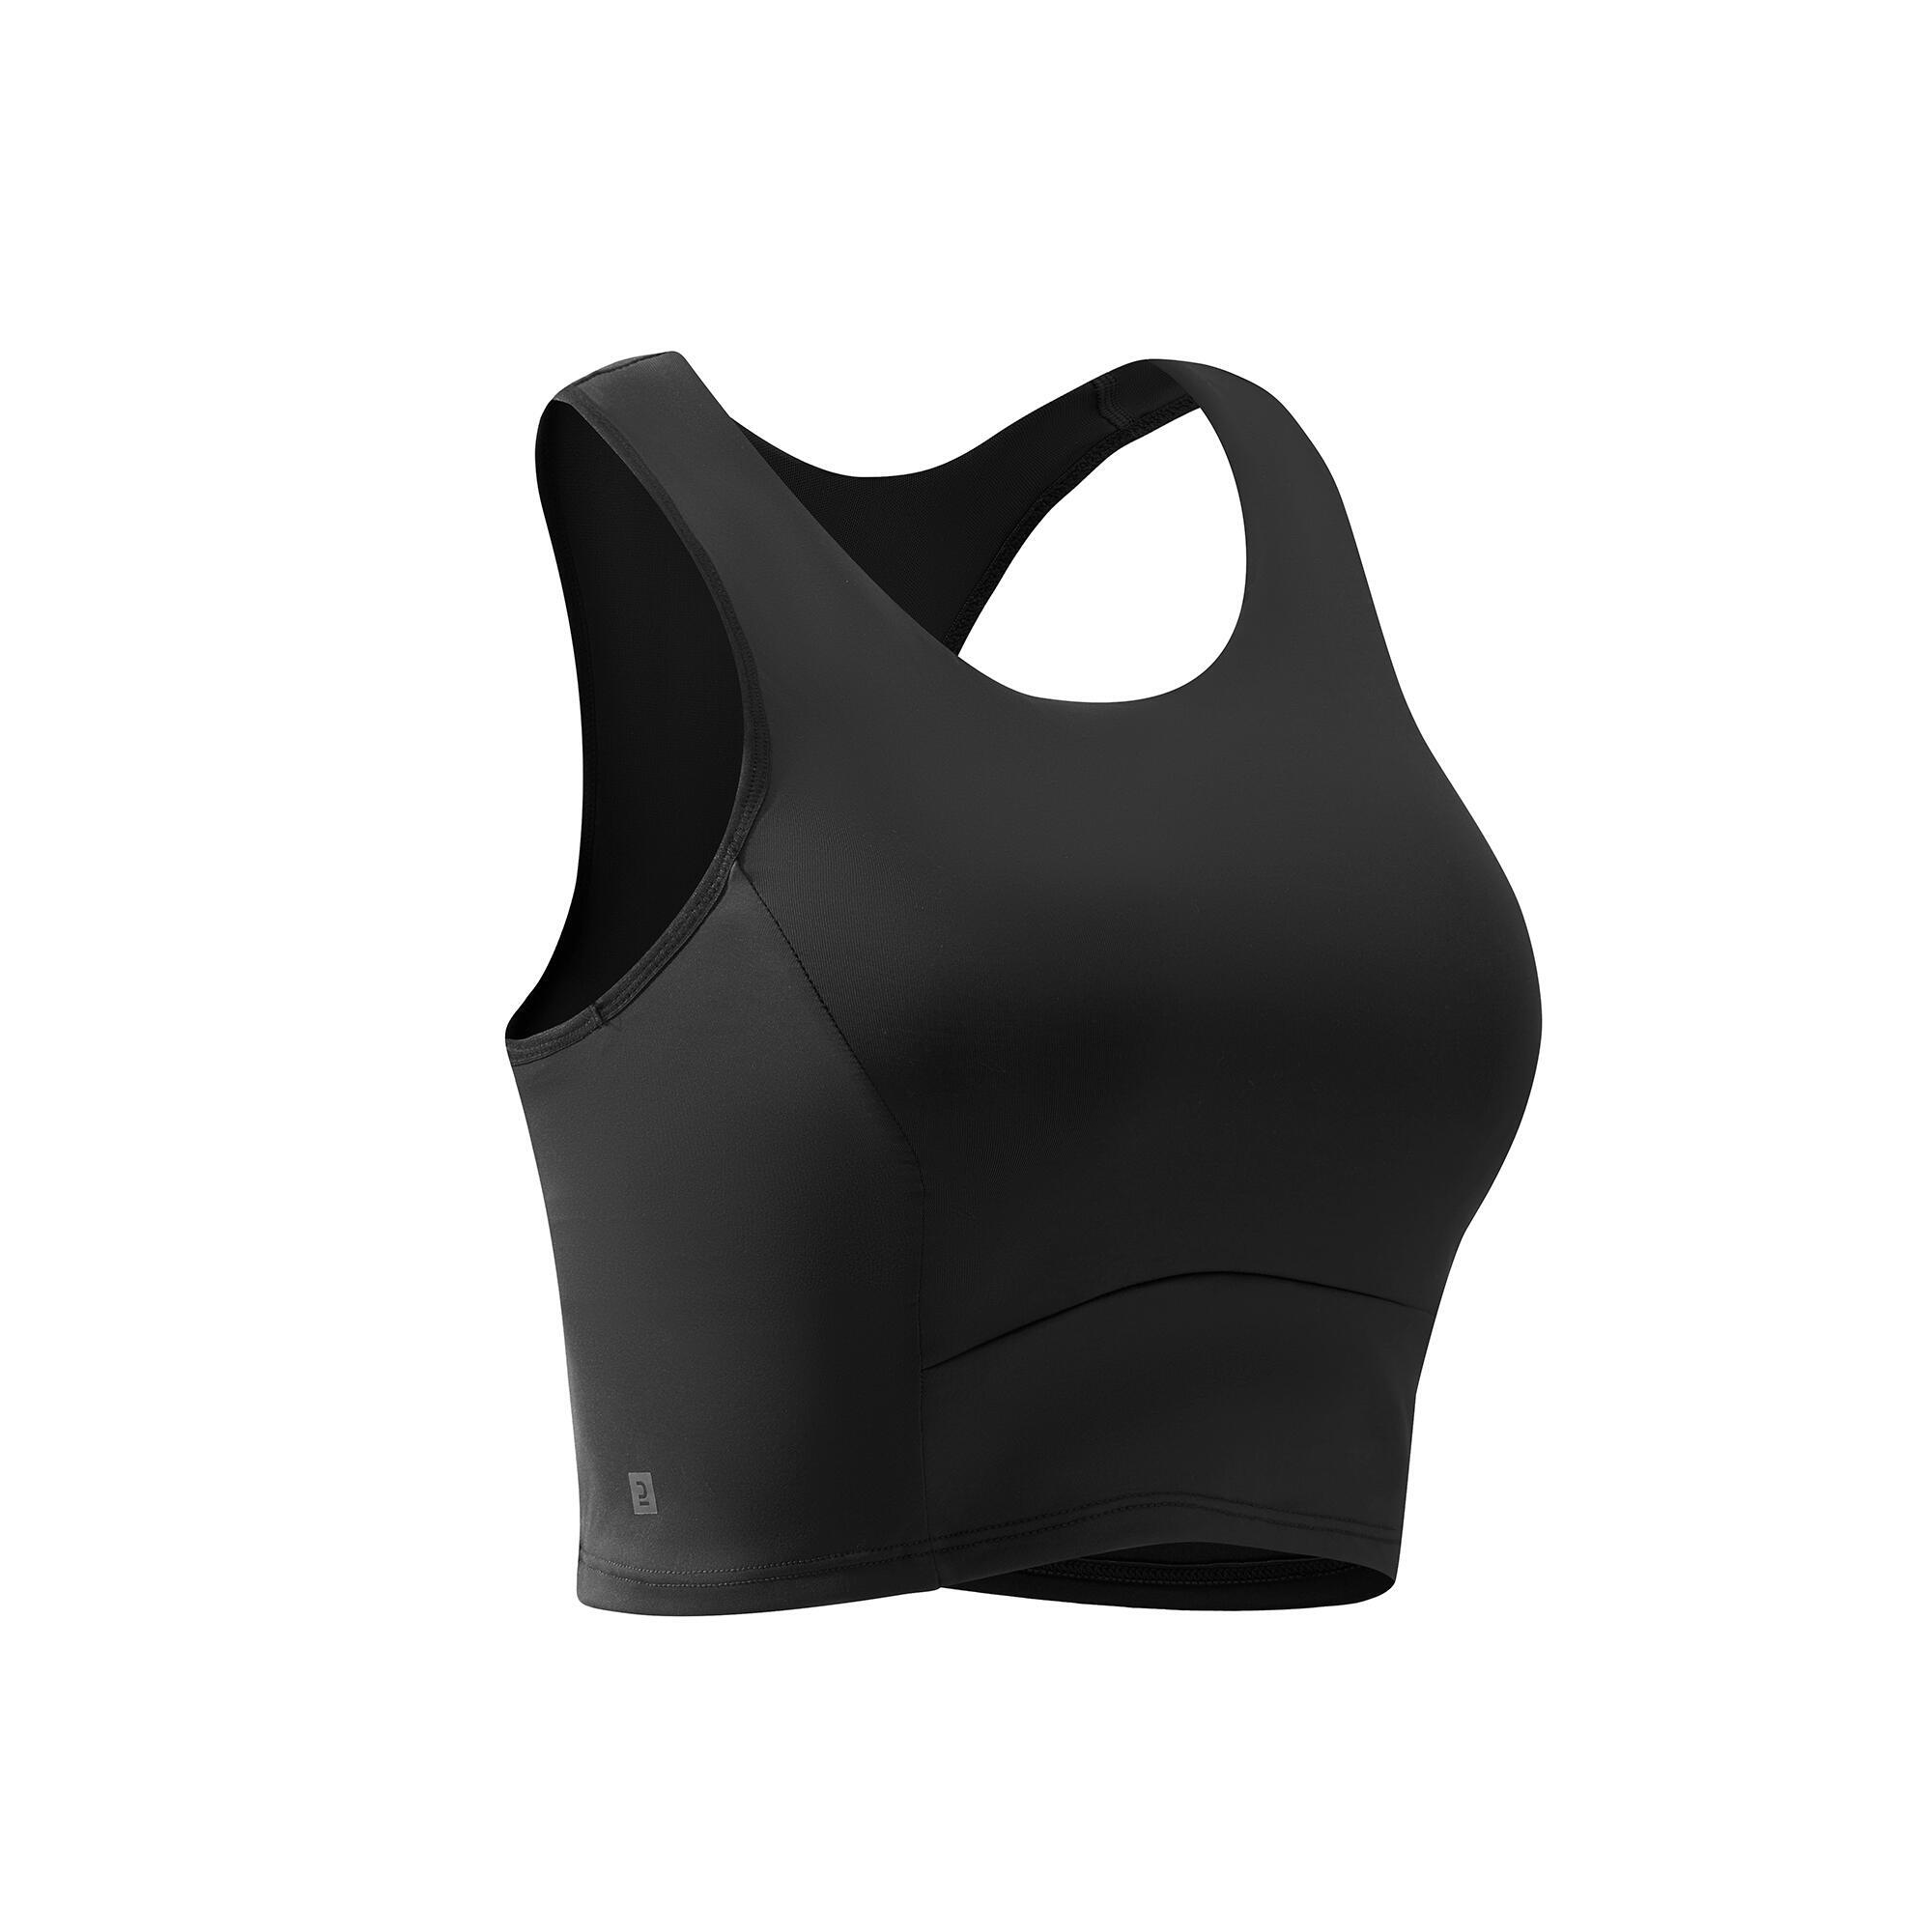 DOMYOS Refurbished Moderate Support Cropped Fitness Sports Bra - A Grade